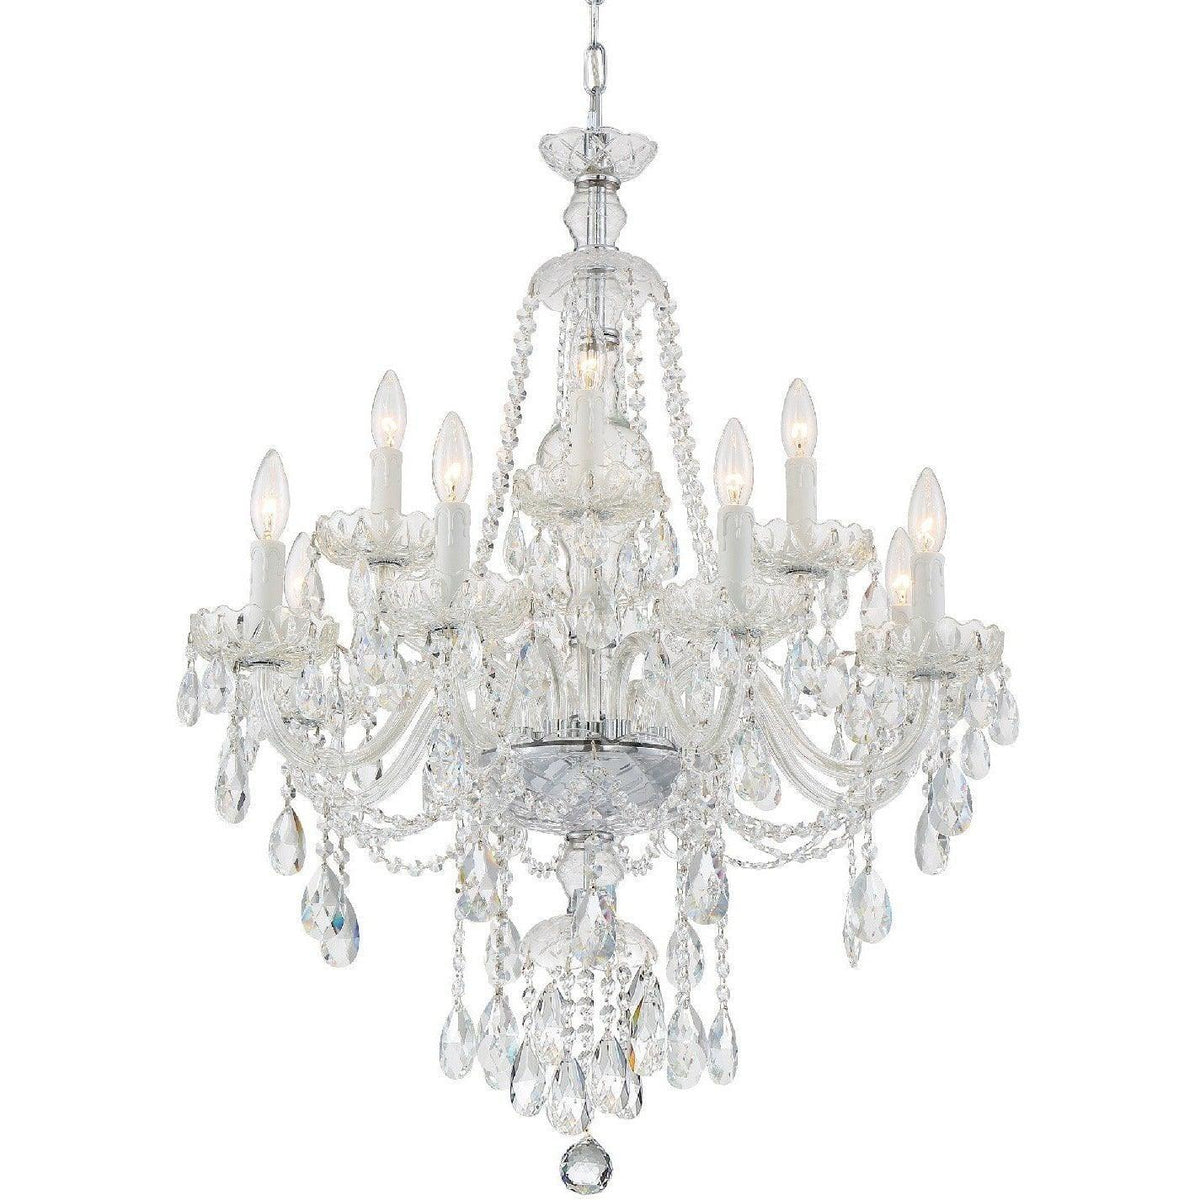 Crystorama - Candace 12 Light Chandelier - CAN-A1312-CH-CL-SAQ | Montreal Lighting & Hardware